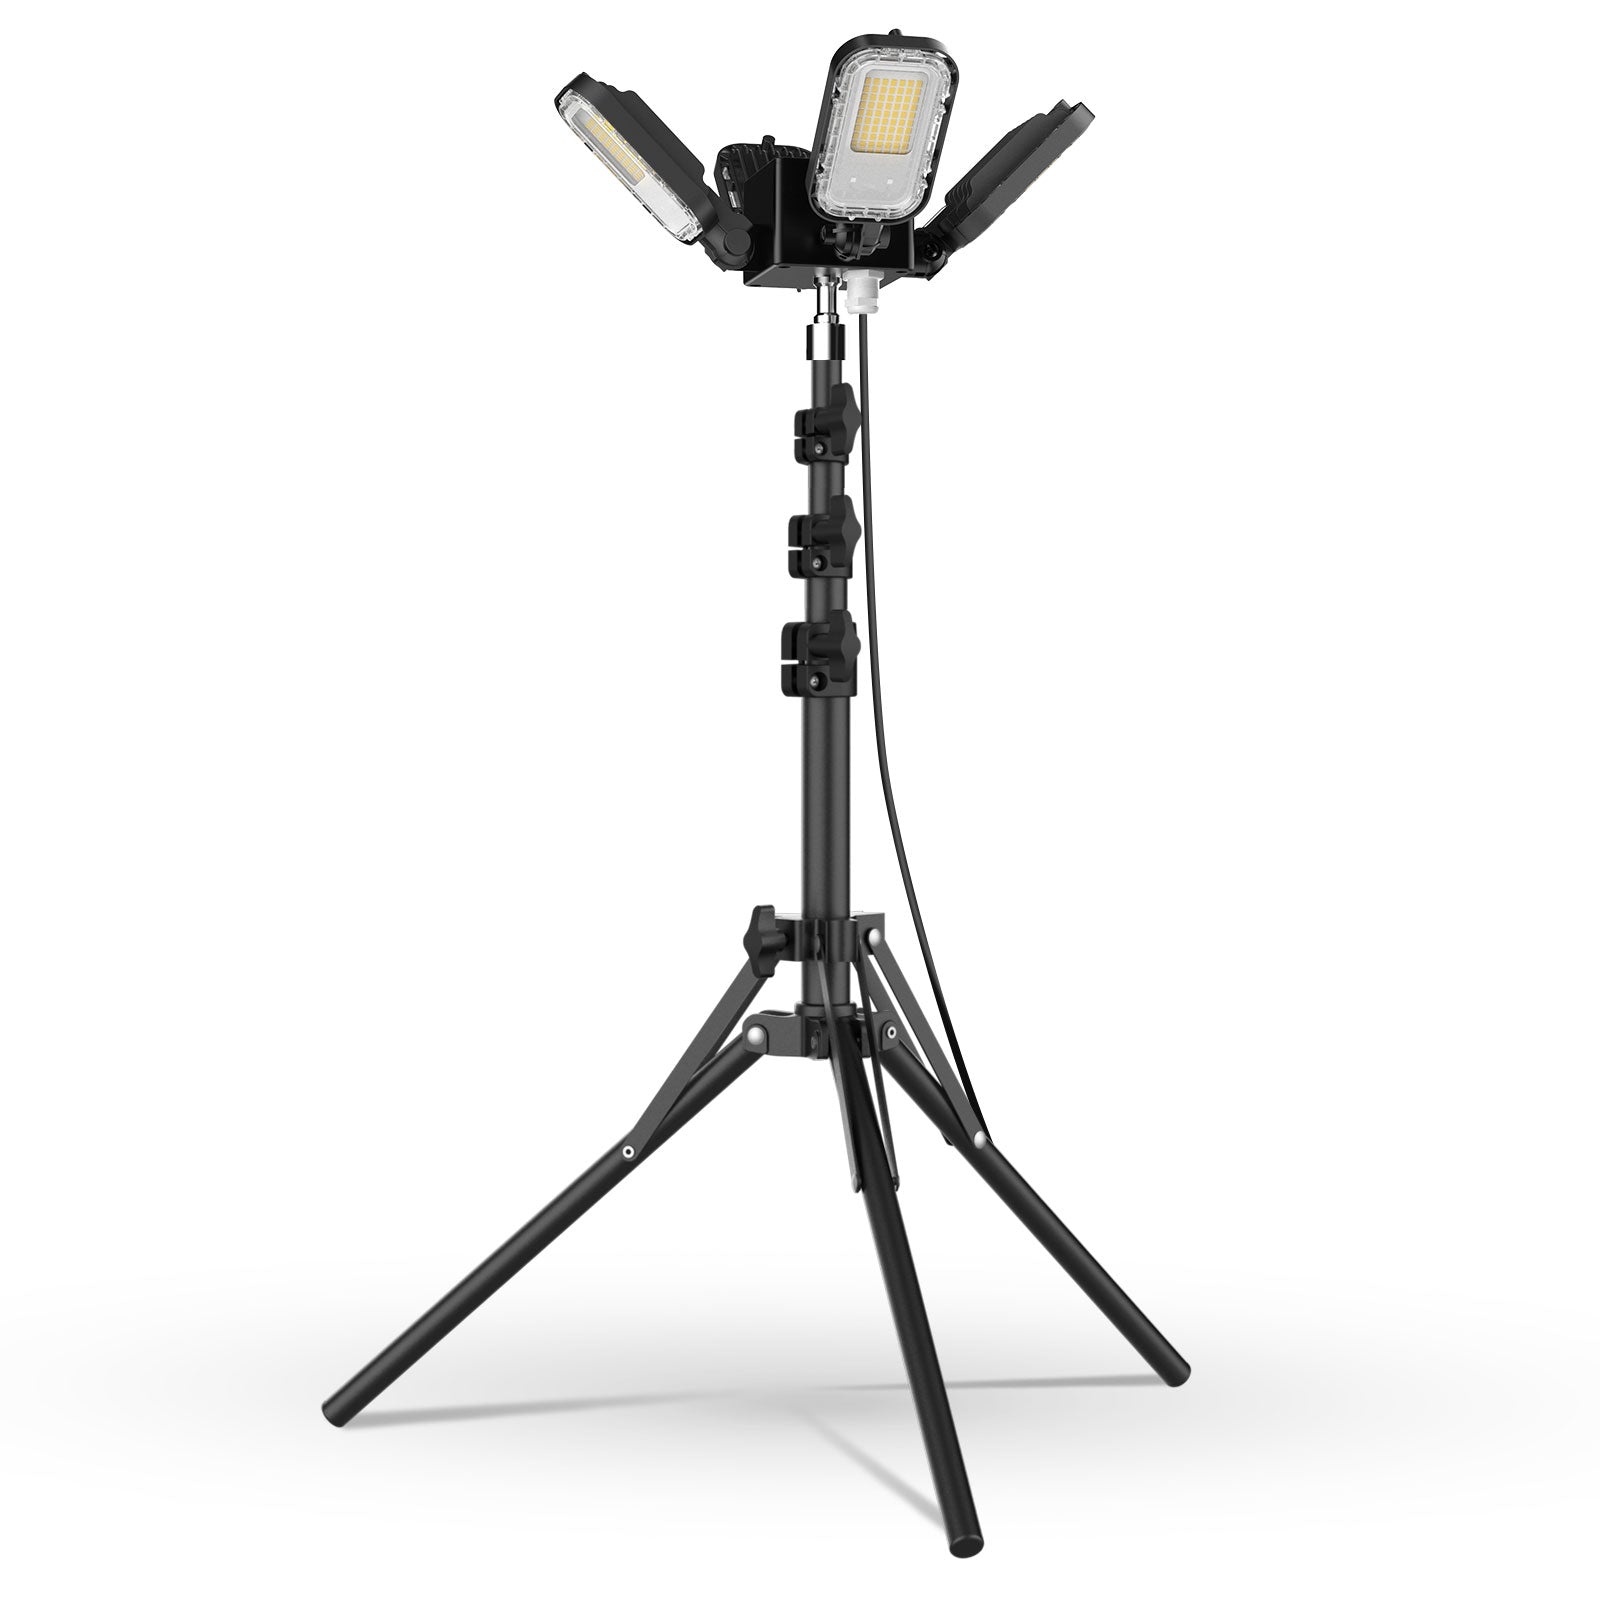 100W Adjustable 4-Head Work Light with Stand